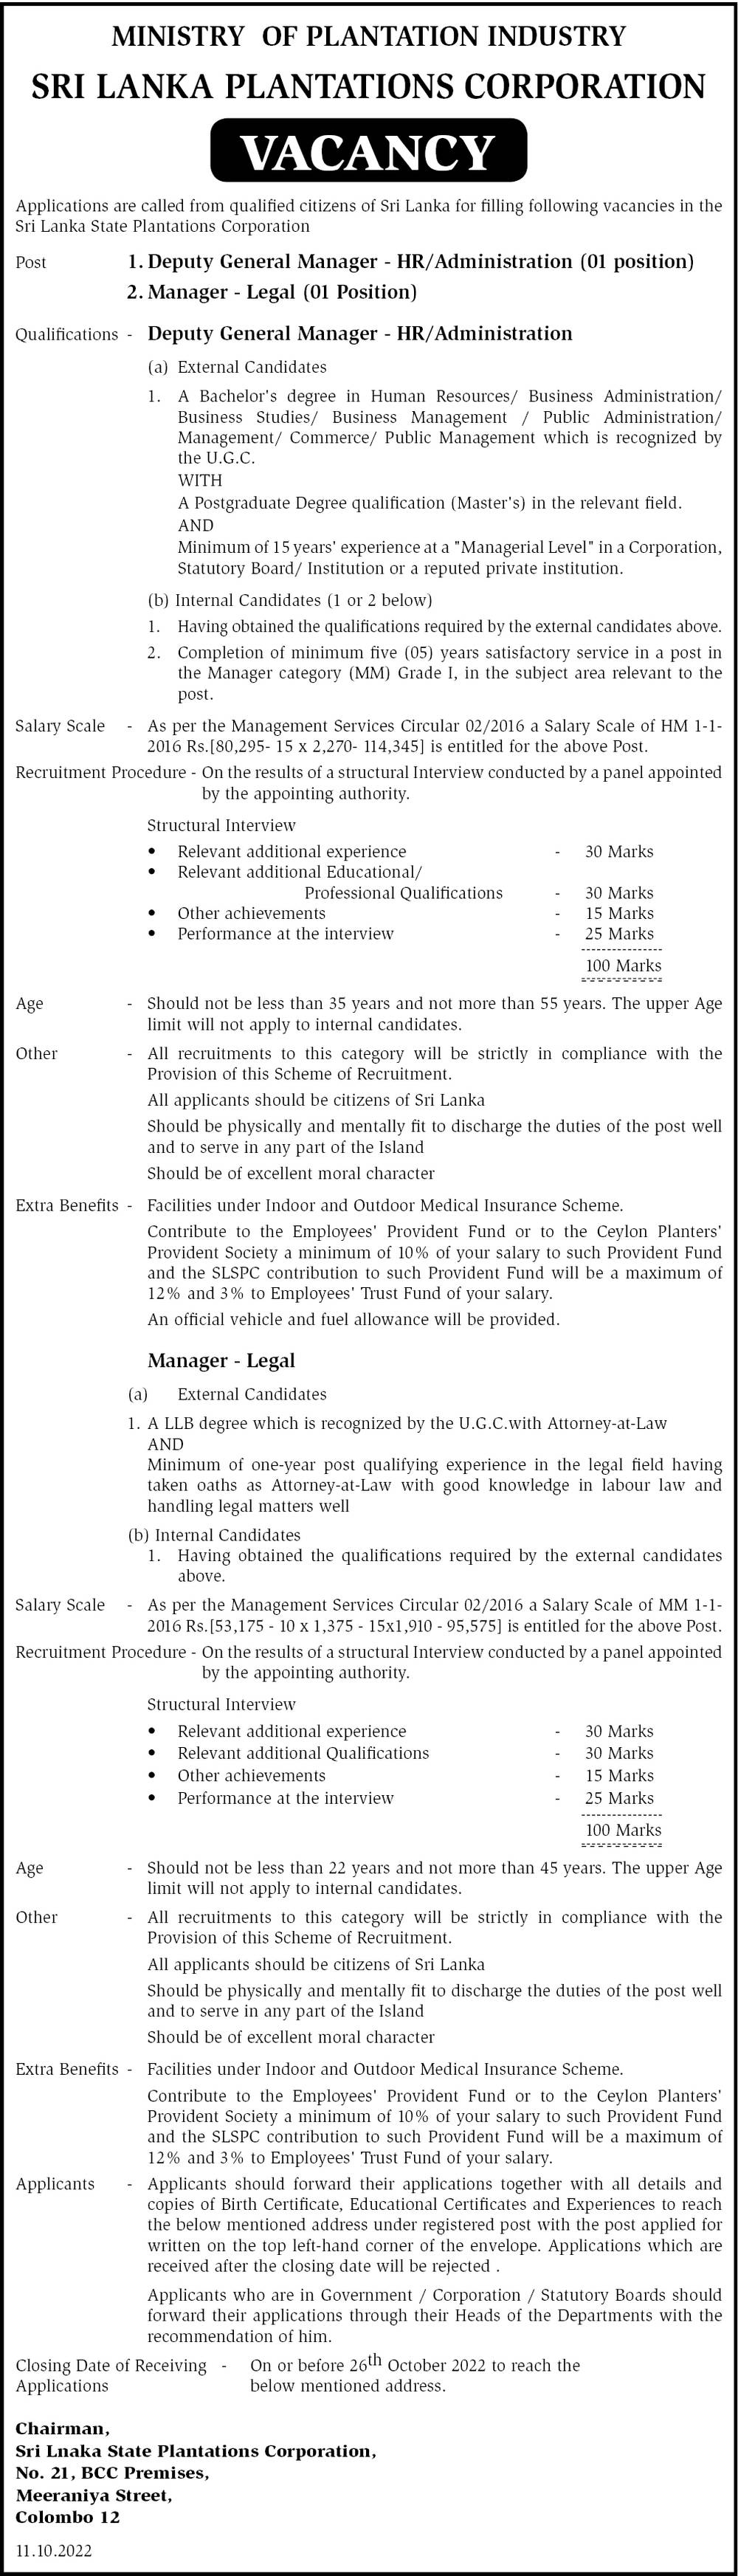 Deputy General Manager (HR Administration) / Manager (Legal) - Ministry of Plantation Industries Jobs Vacancies